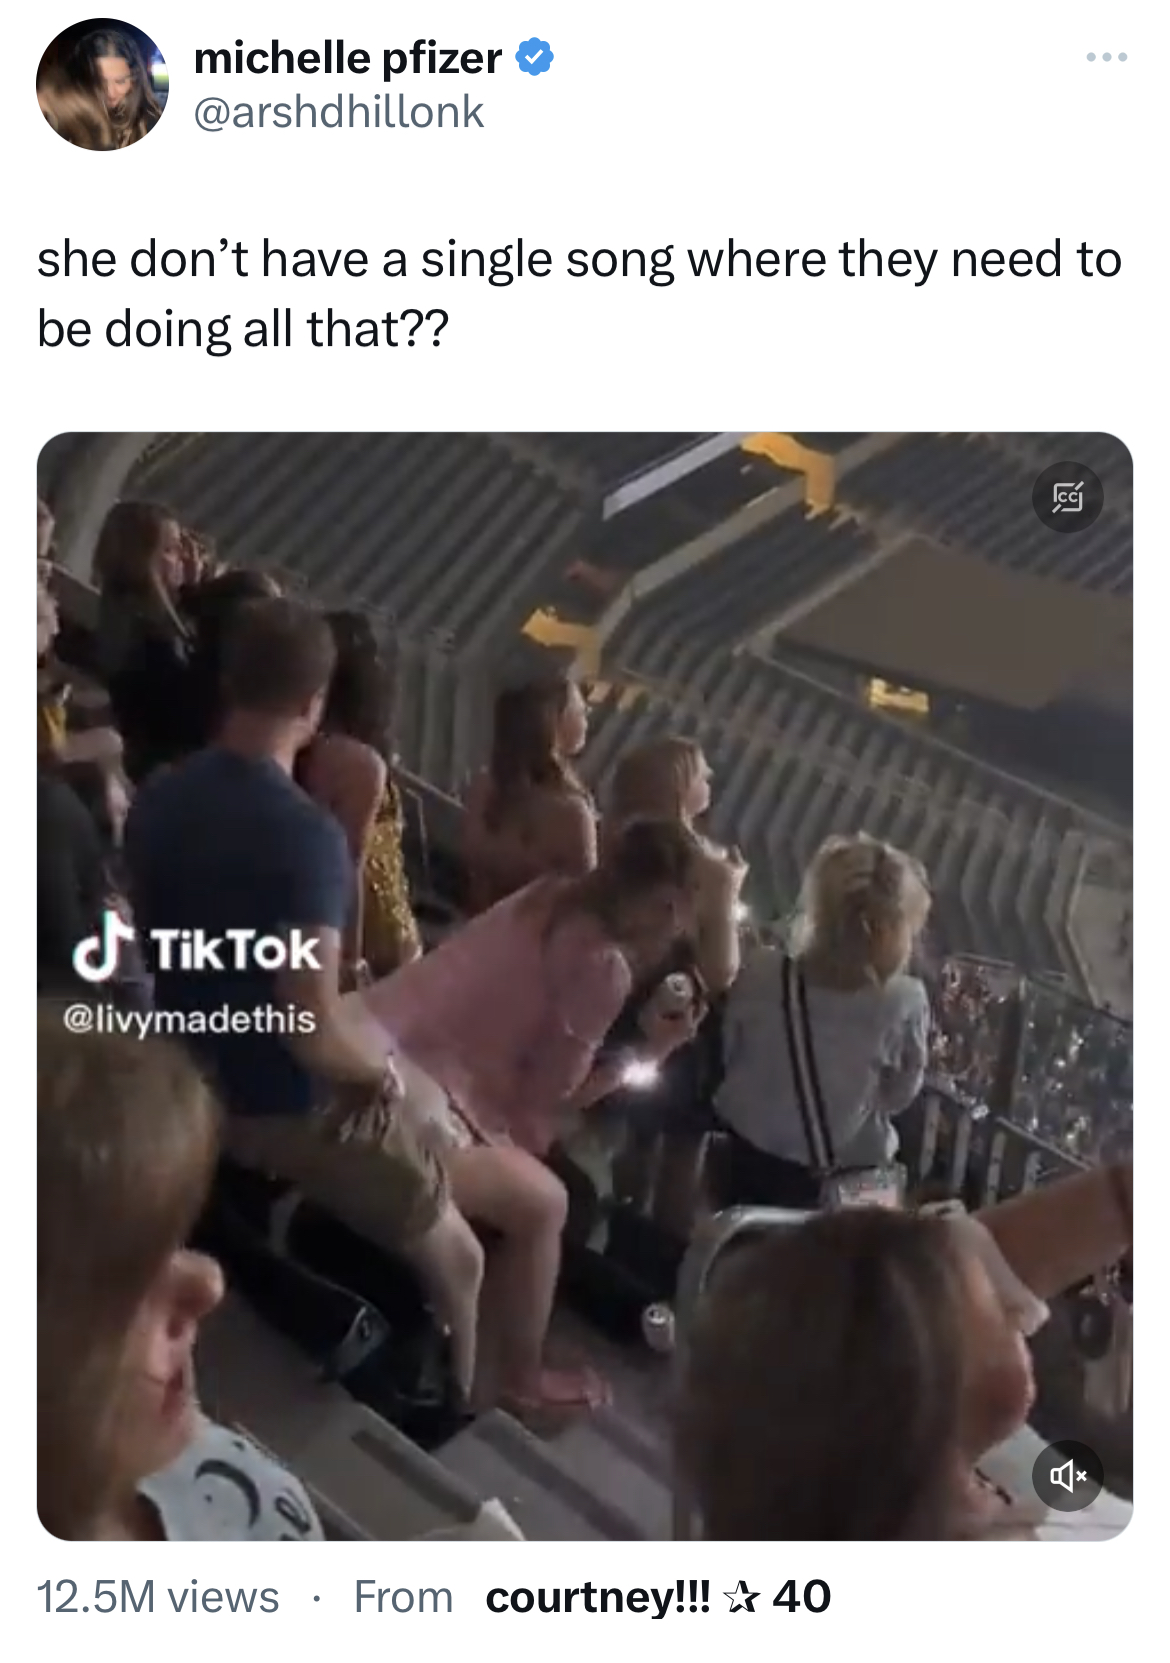 Don't have a single song where they need to do this - photo caption - michelle pfizer she don't have a single song where they need to be doing all that?? TikTok 12.5M views From courtney!!! 40 130 %7